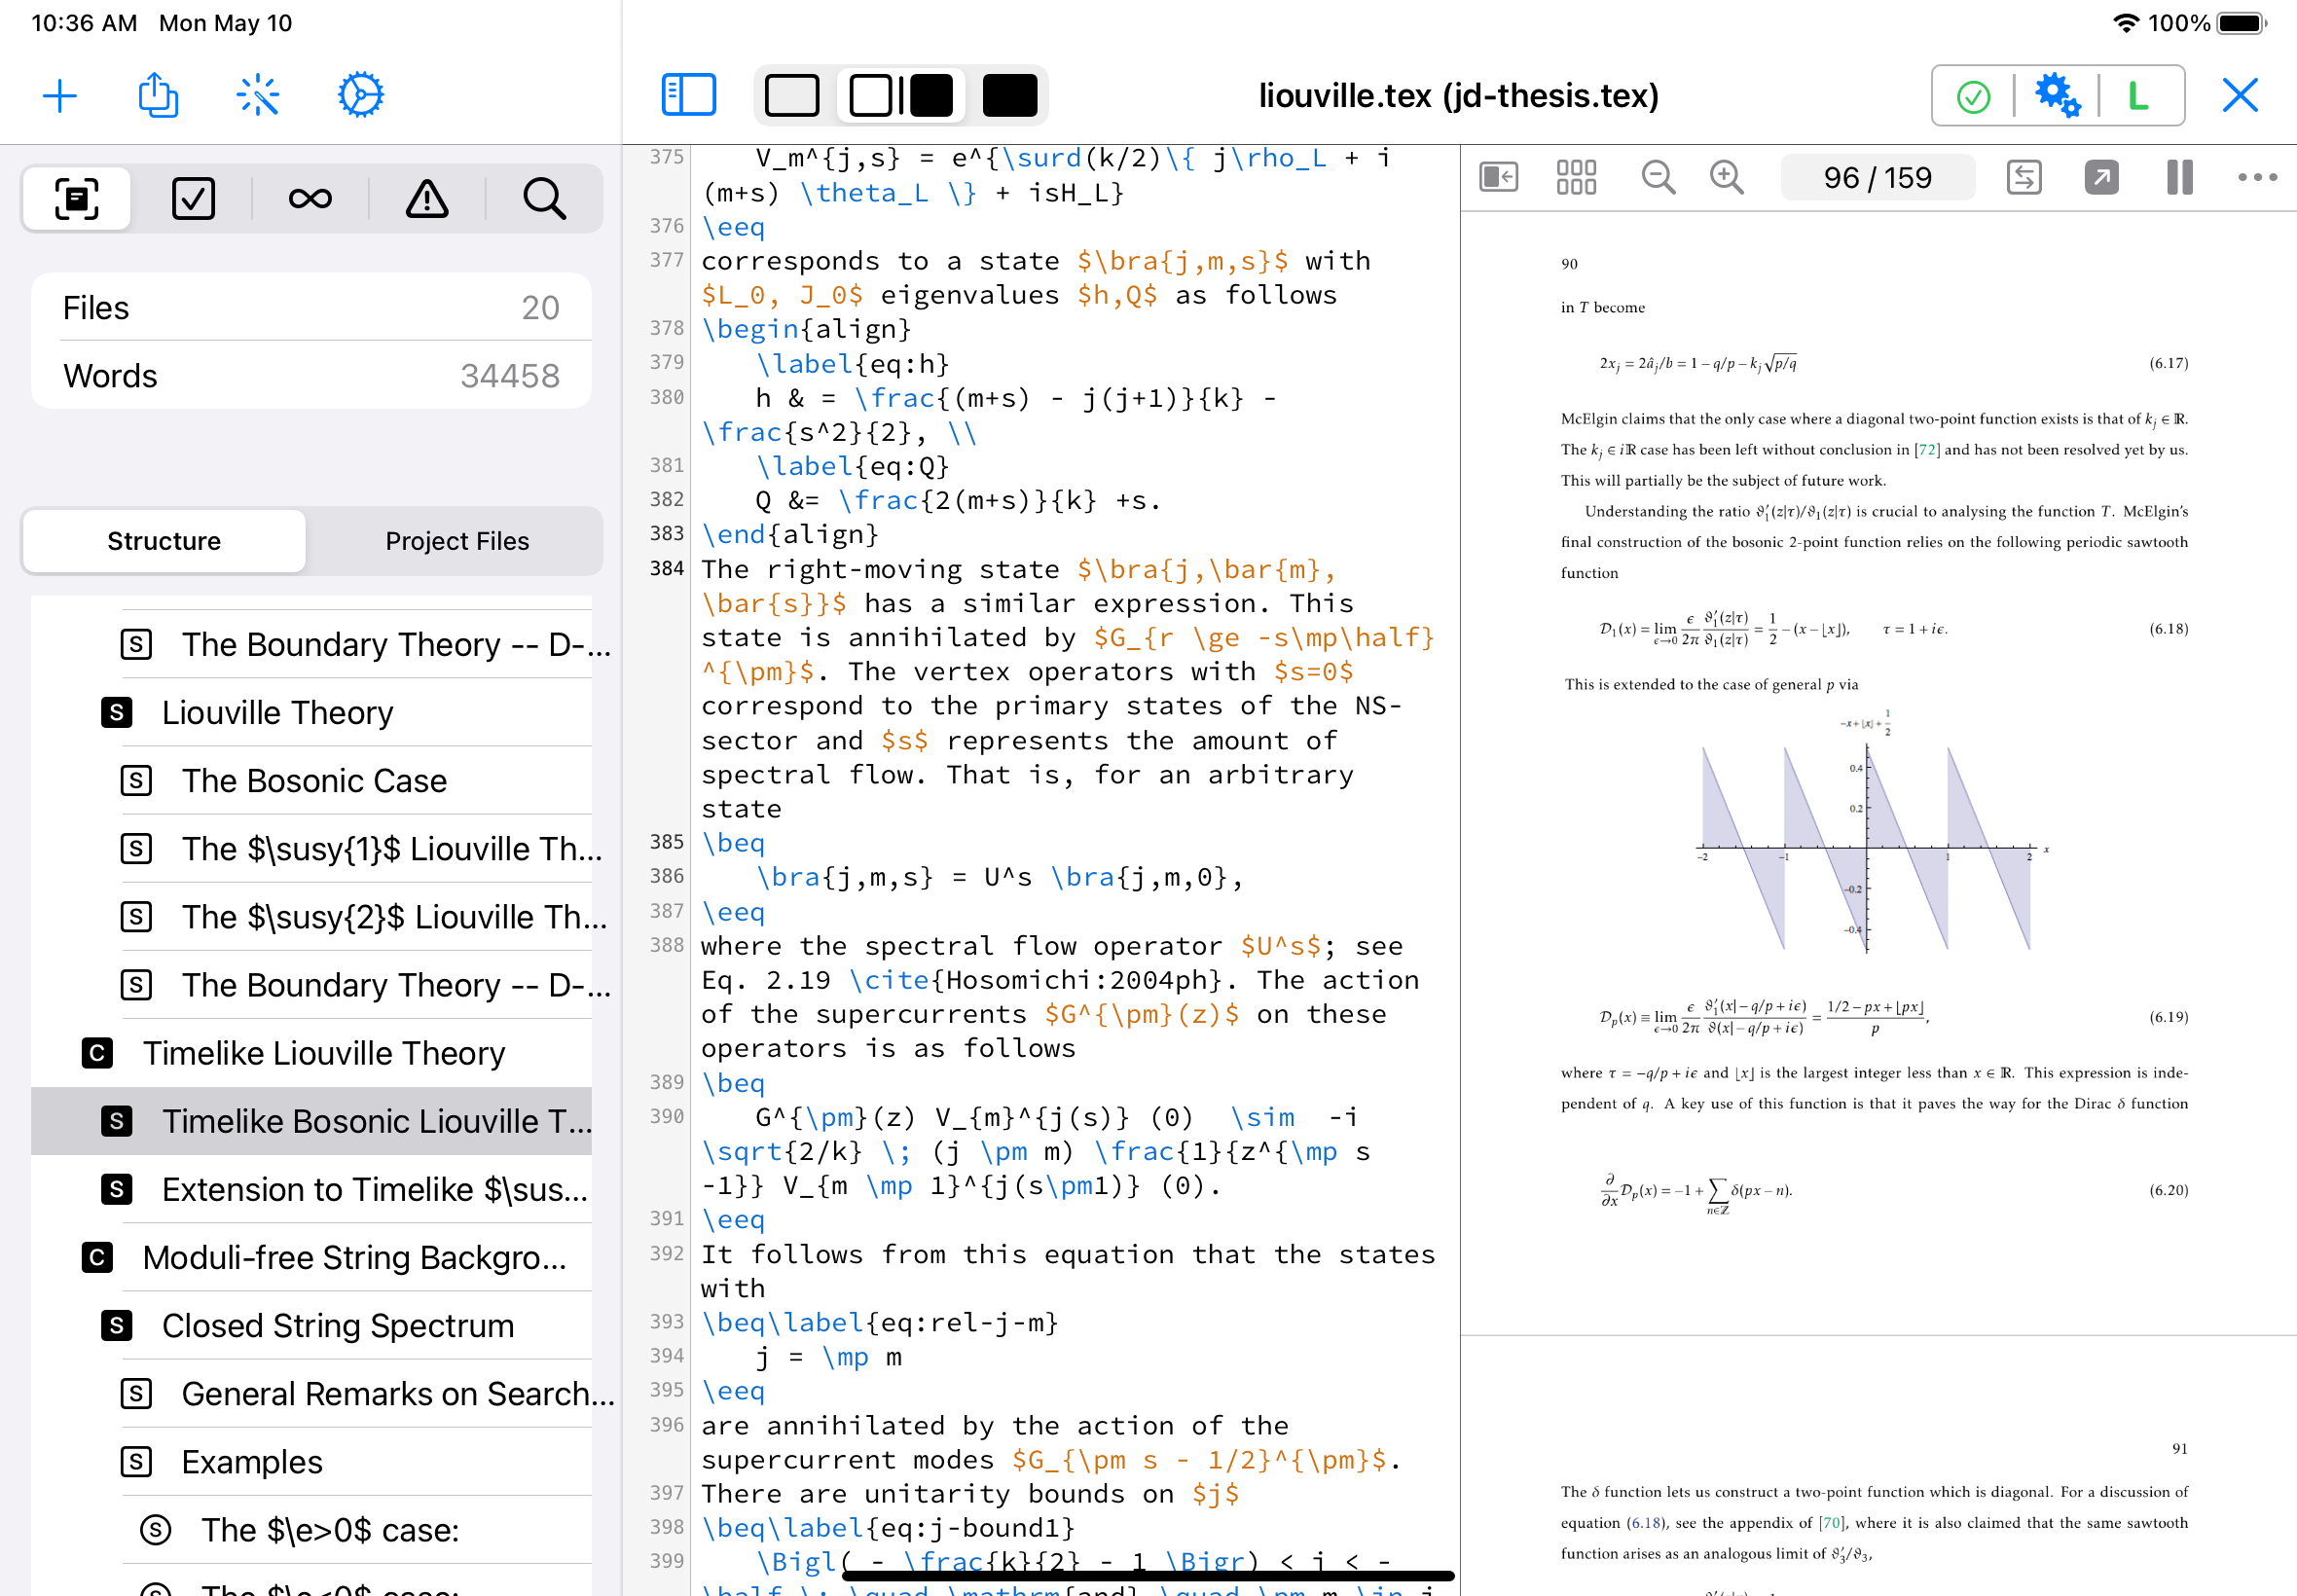 docs/apps/workspace/jd-thesis-sawtooth_ios.png